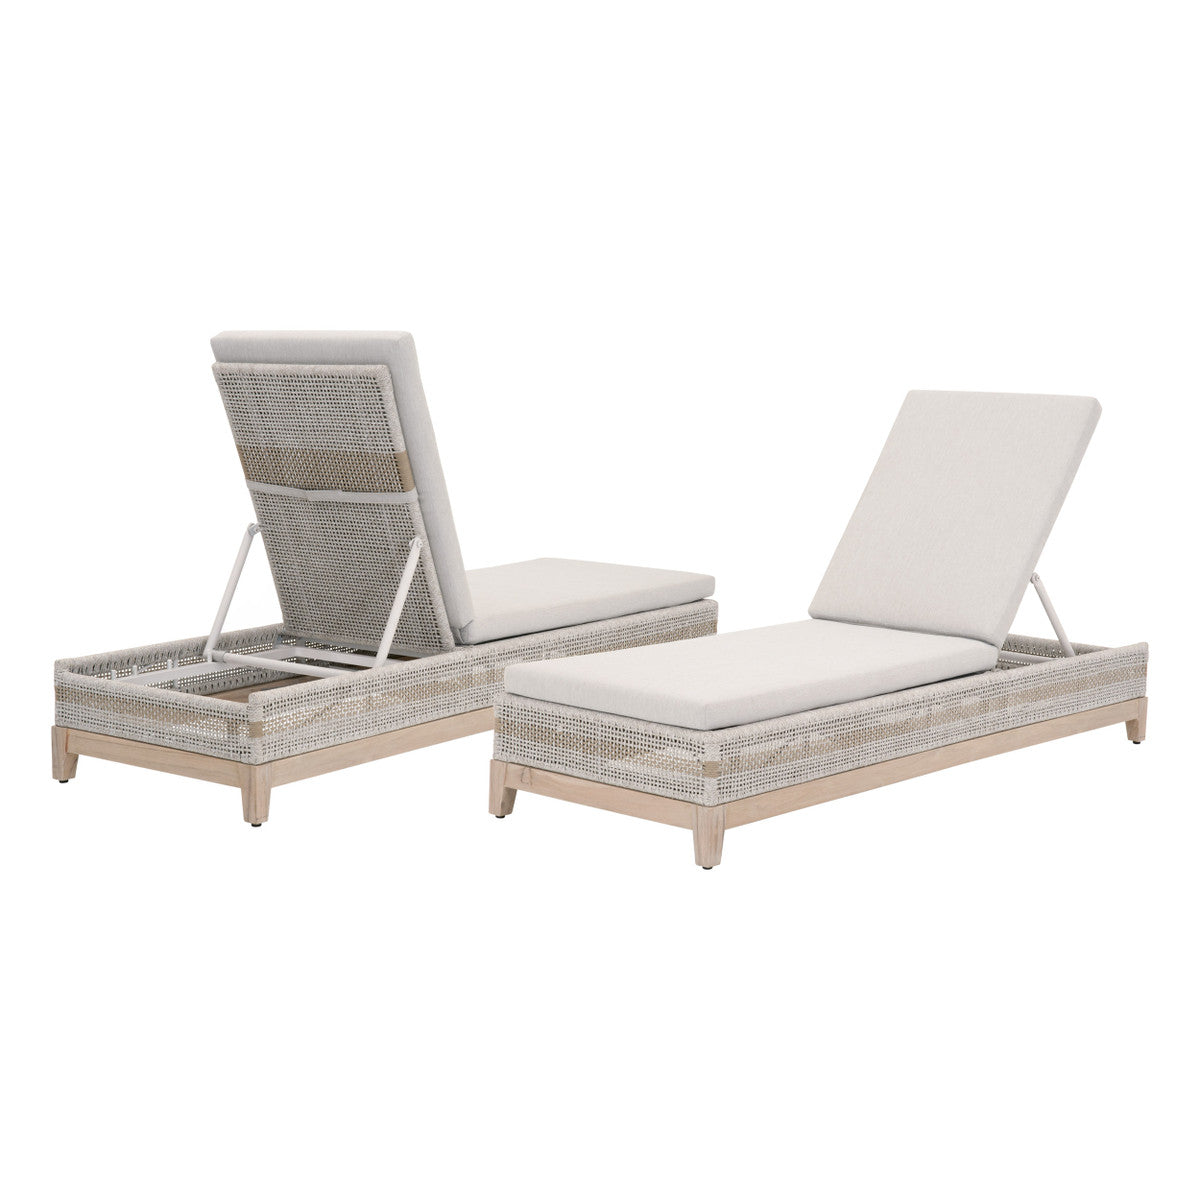 Tapestry Outdoor Chaise Lounge in Taupe & White Flat Rope, Taupe Stripe, Performance Pumice, Gray Teak - 6845.WTA/PUM/GT